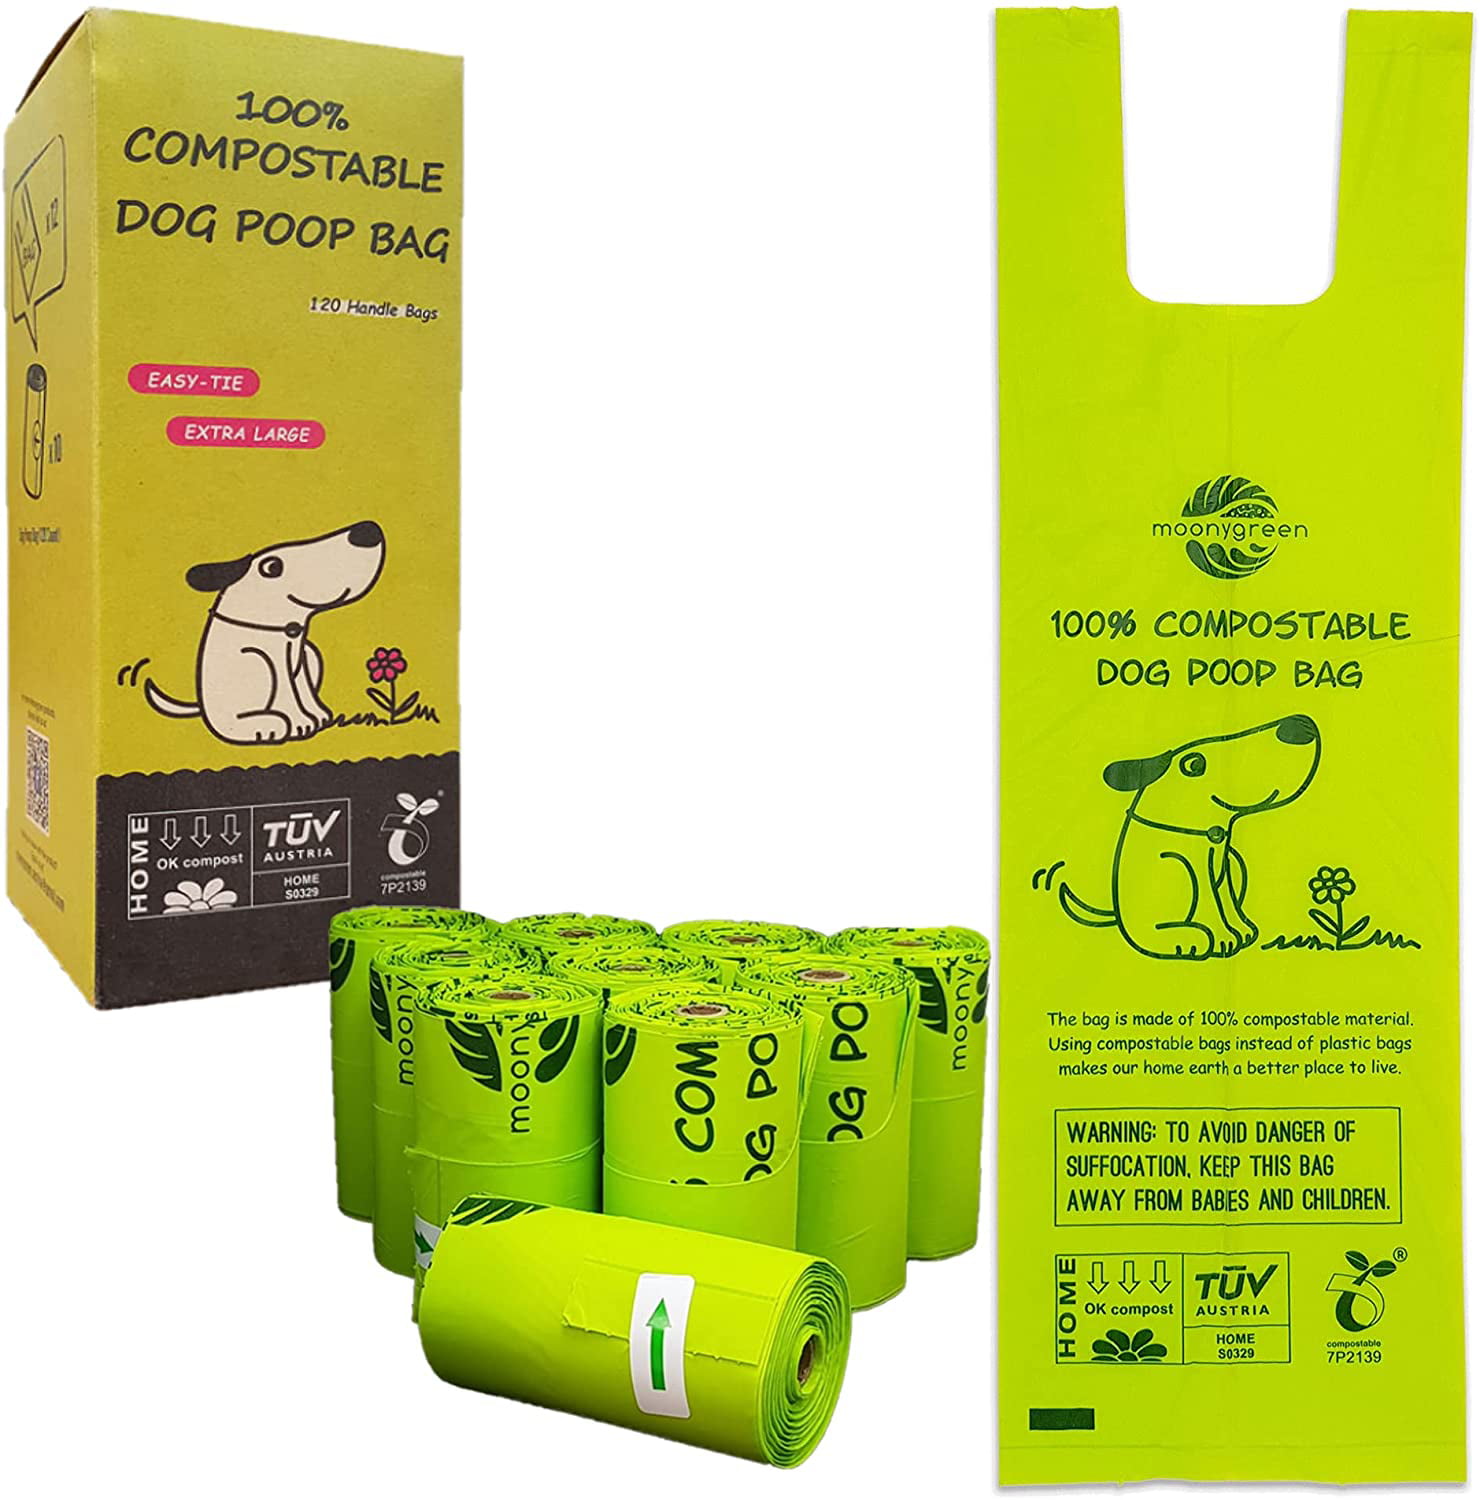 Compostable Dog Poop Bags with Handles Large Poo Waste Bag for Pets Eco-Friendly Leak-Proof Doggie Bags for Poop Holder Biodegradable Doggy Poop Bag with Easy Tie Handles Refills Unscented 